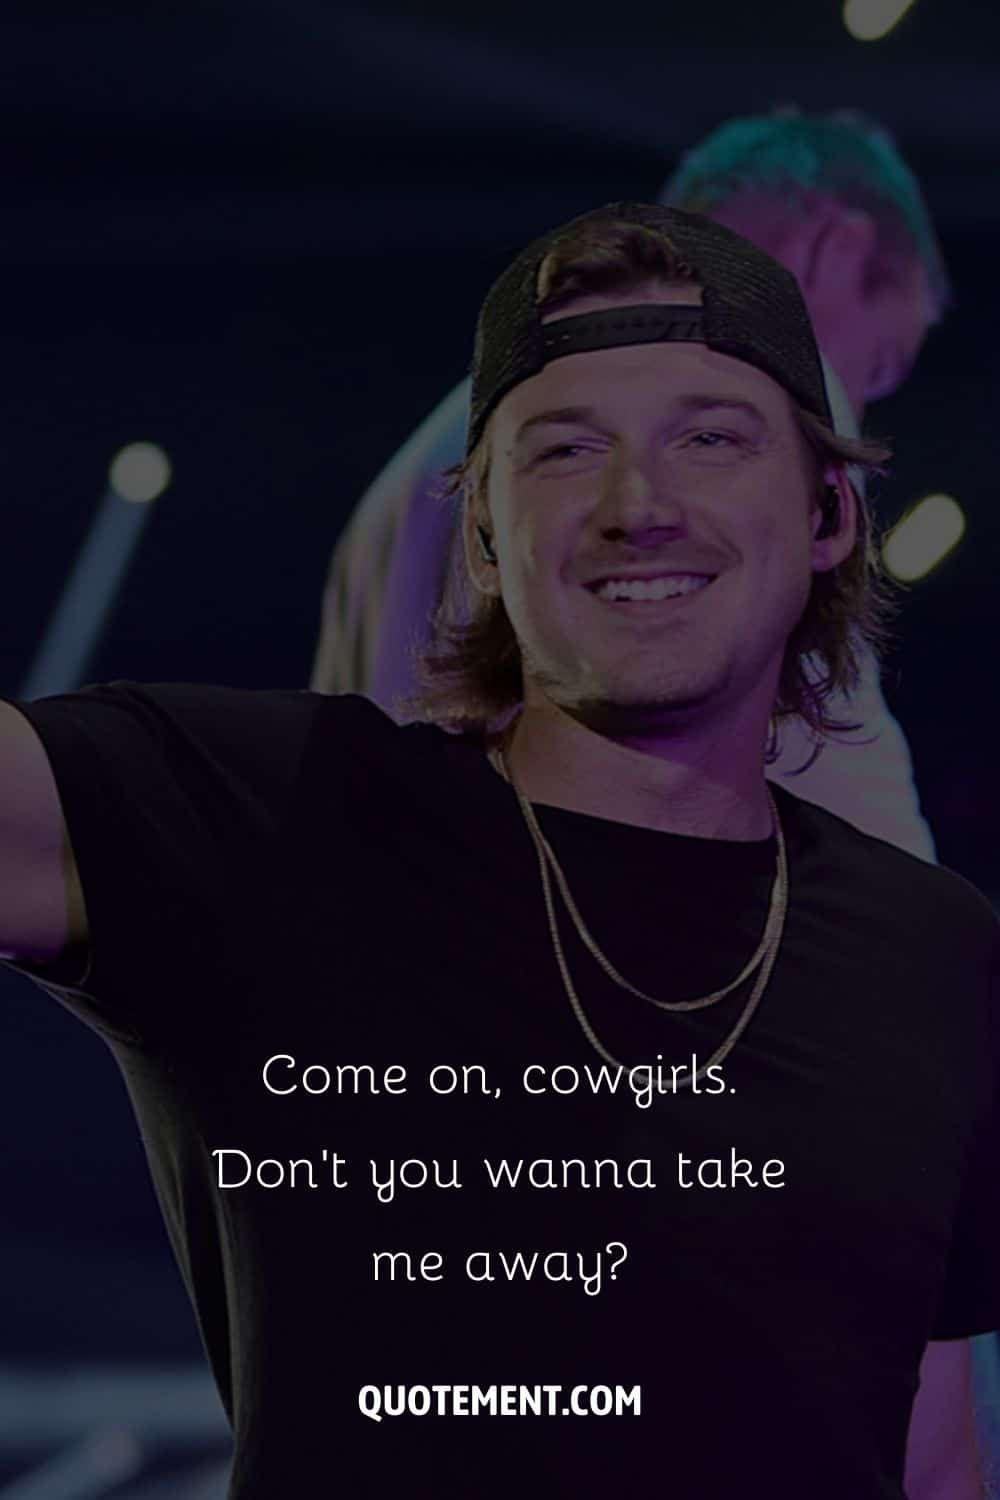 A country artist performing on stage representing morgan wallen quote